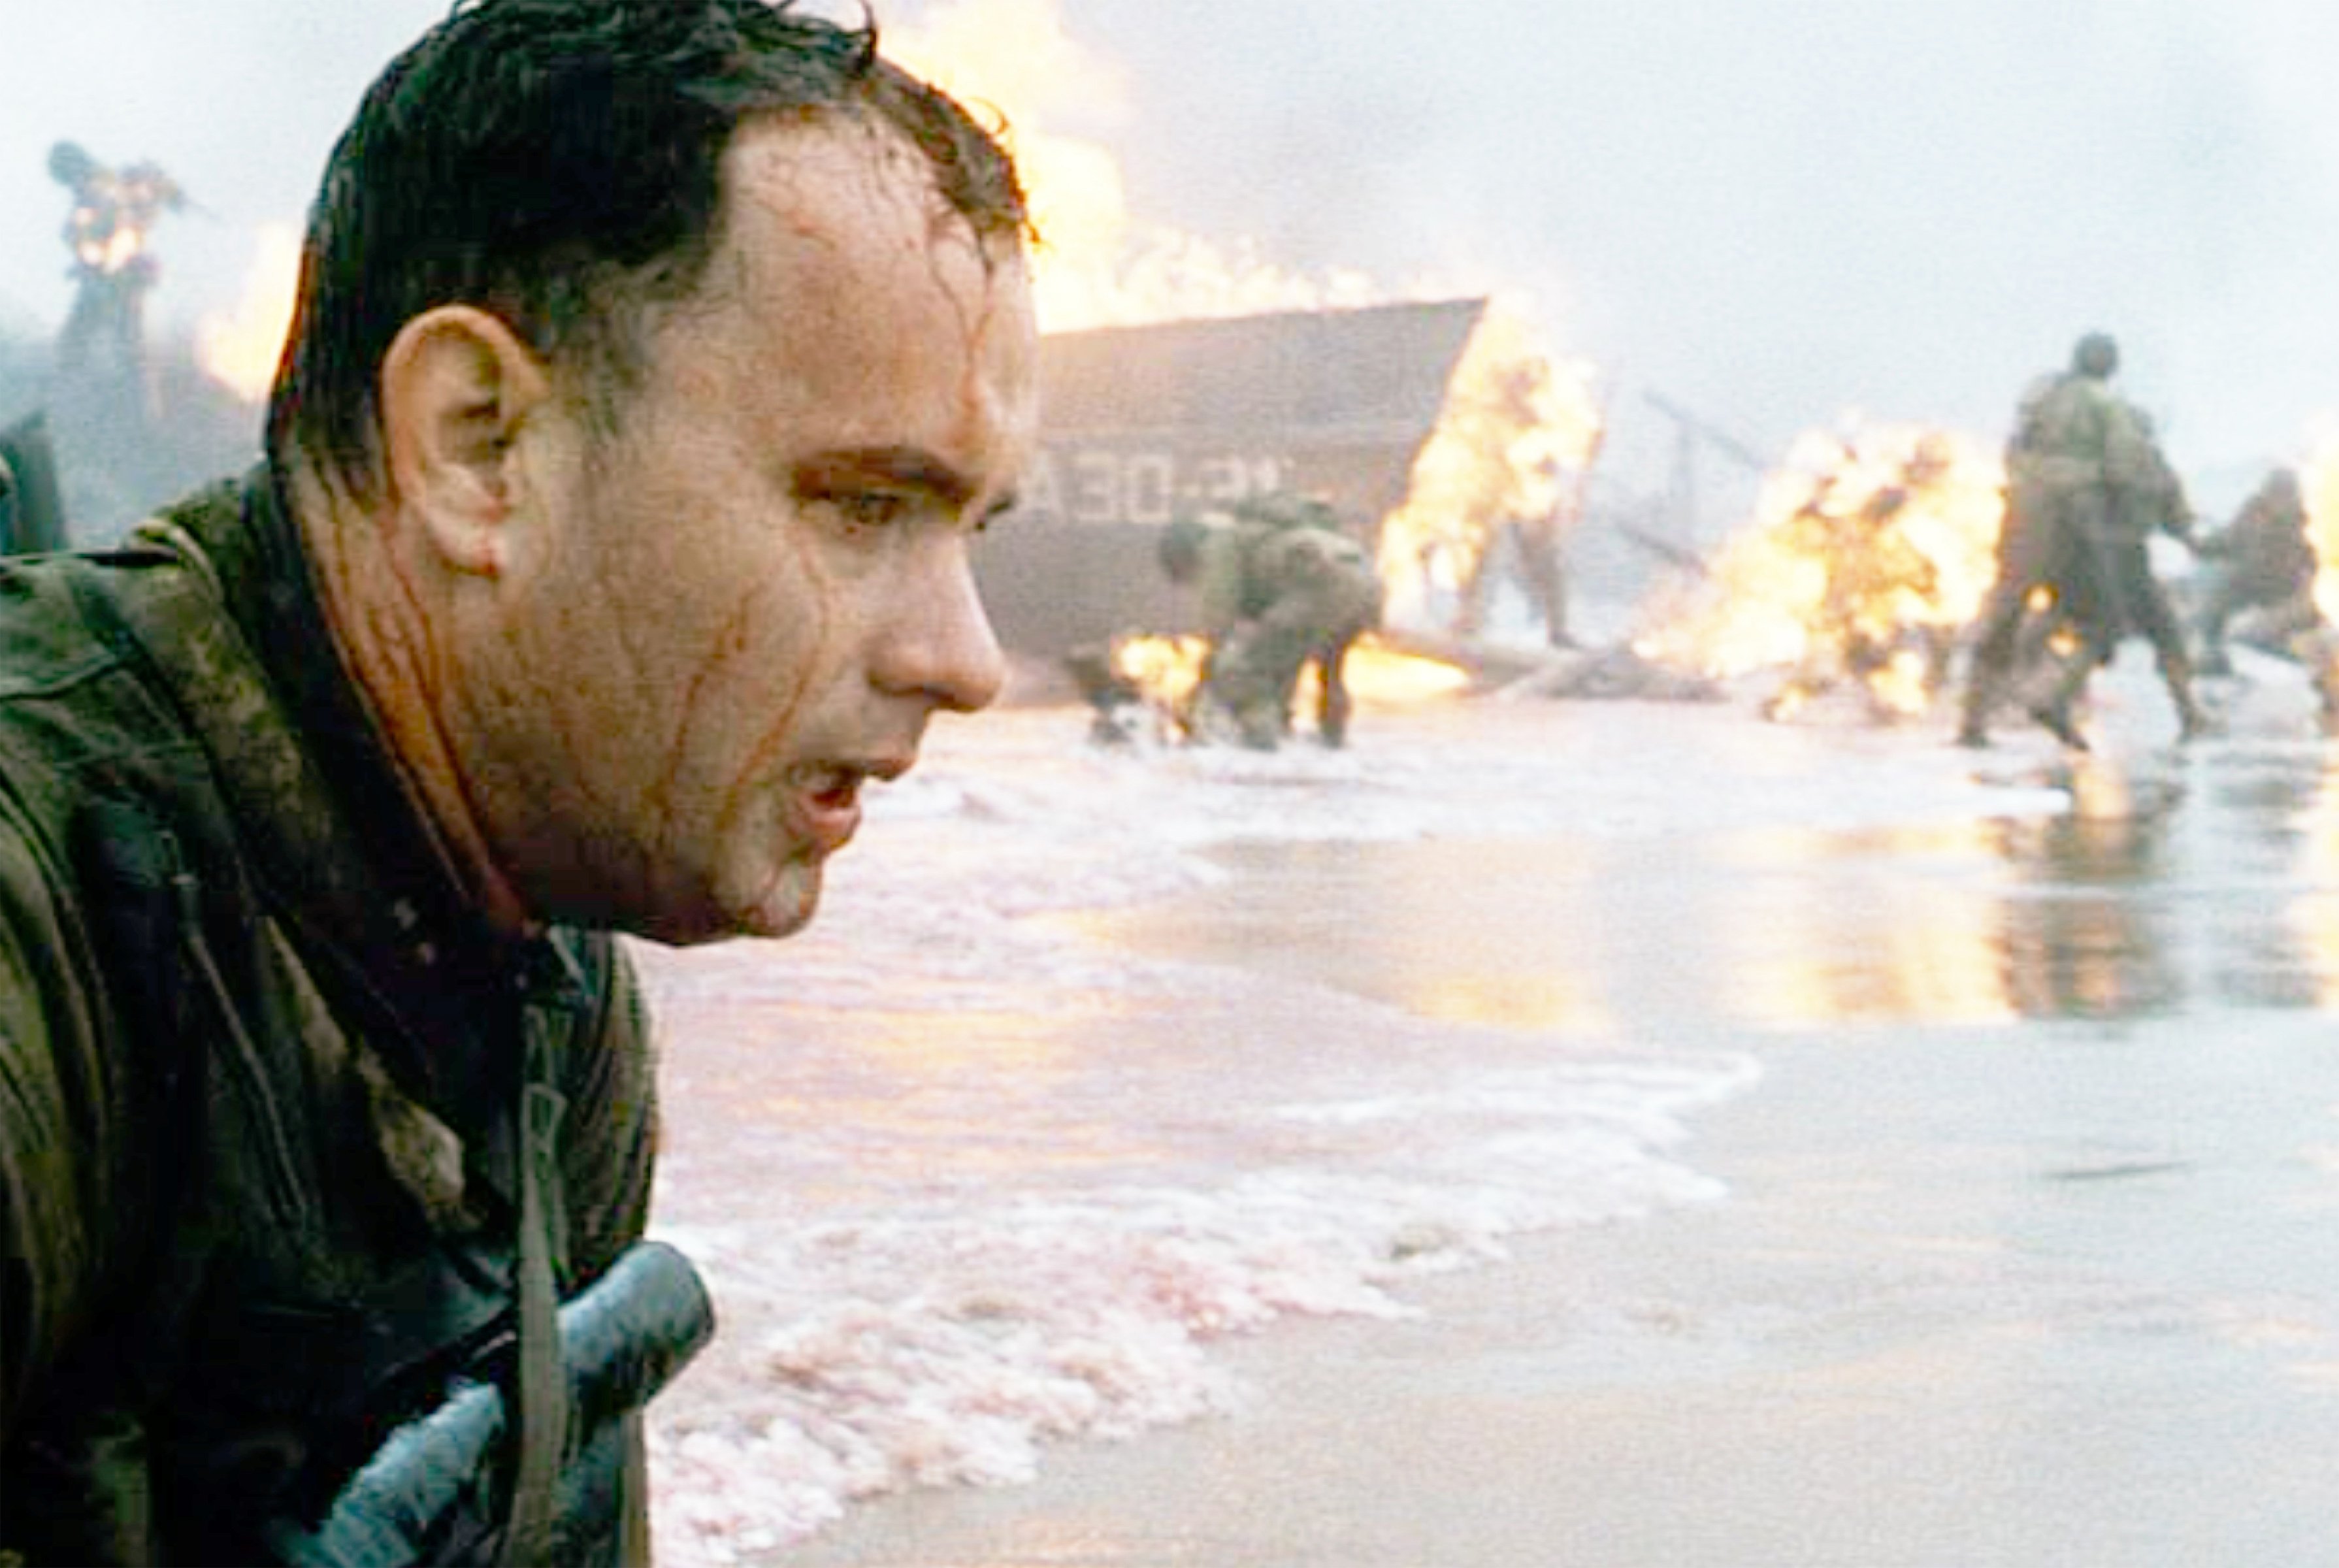 Saving Private Ryan: Tom Hanks on Omaha Beach after D-Day